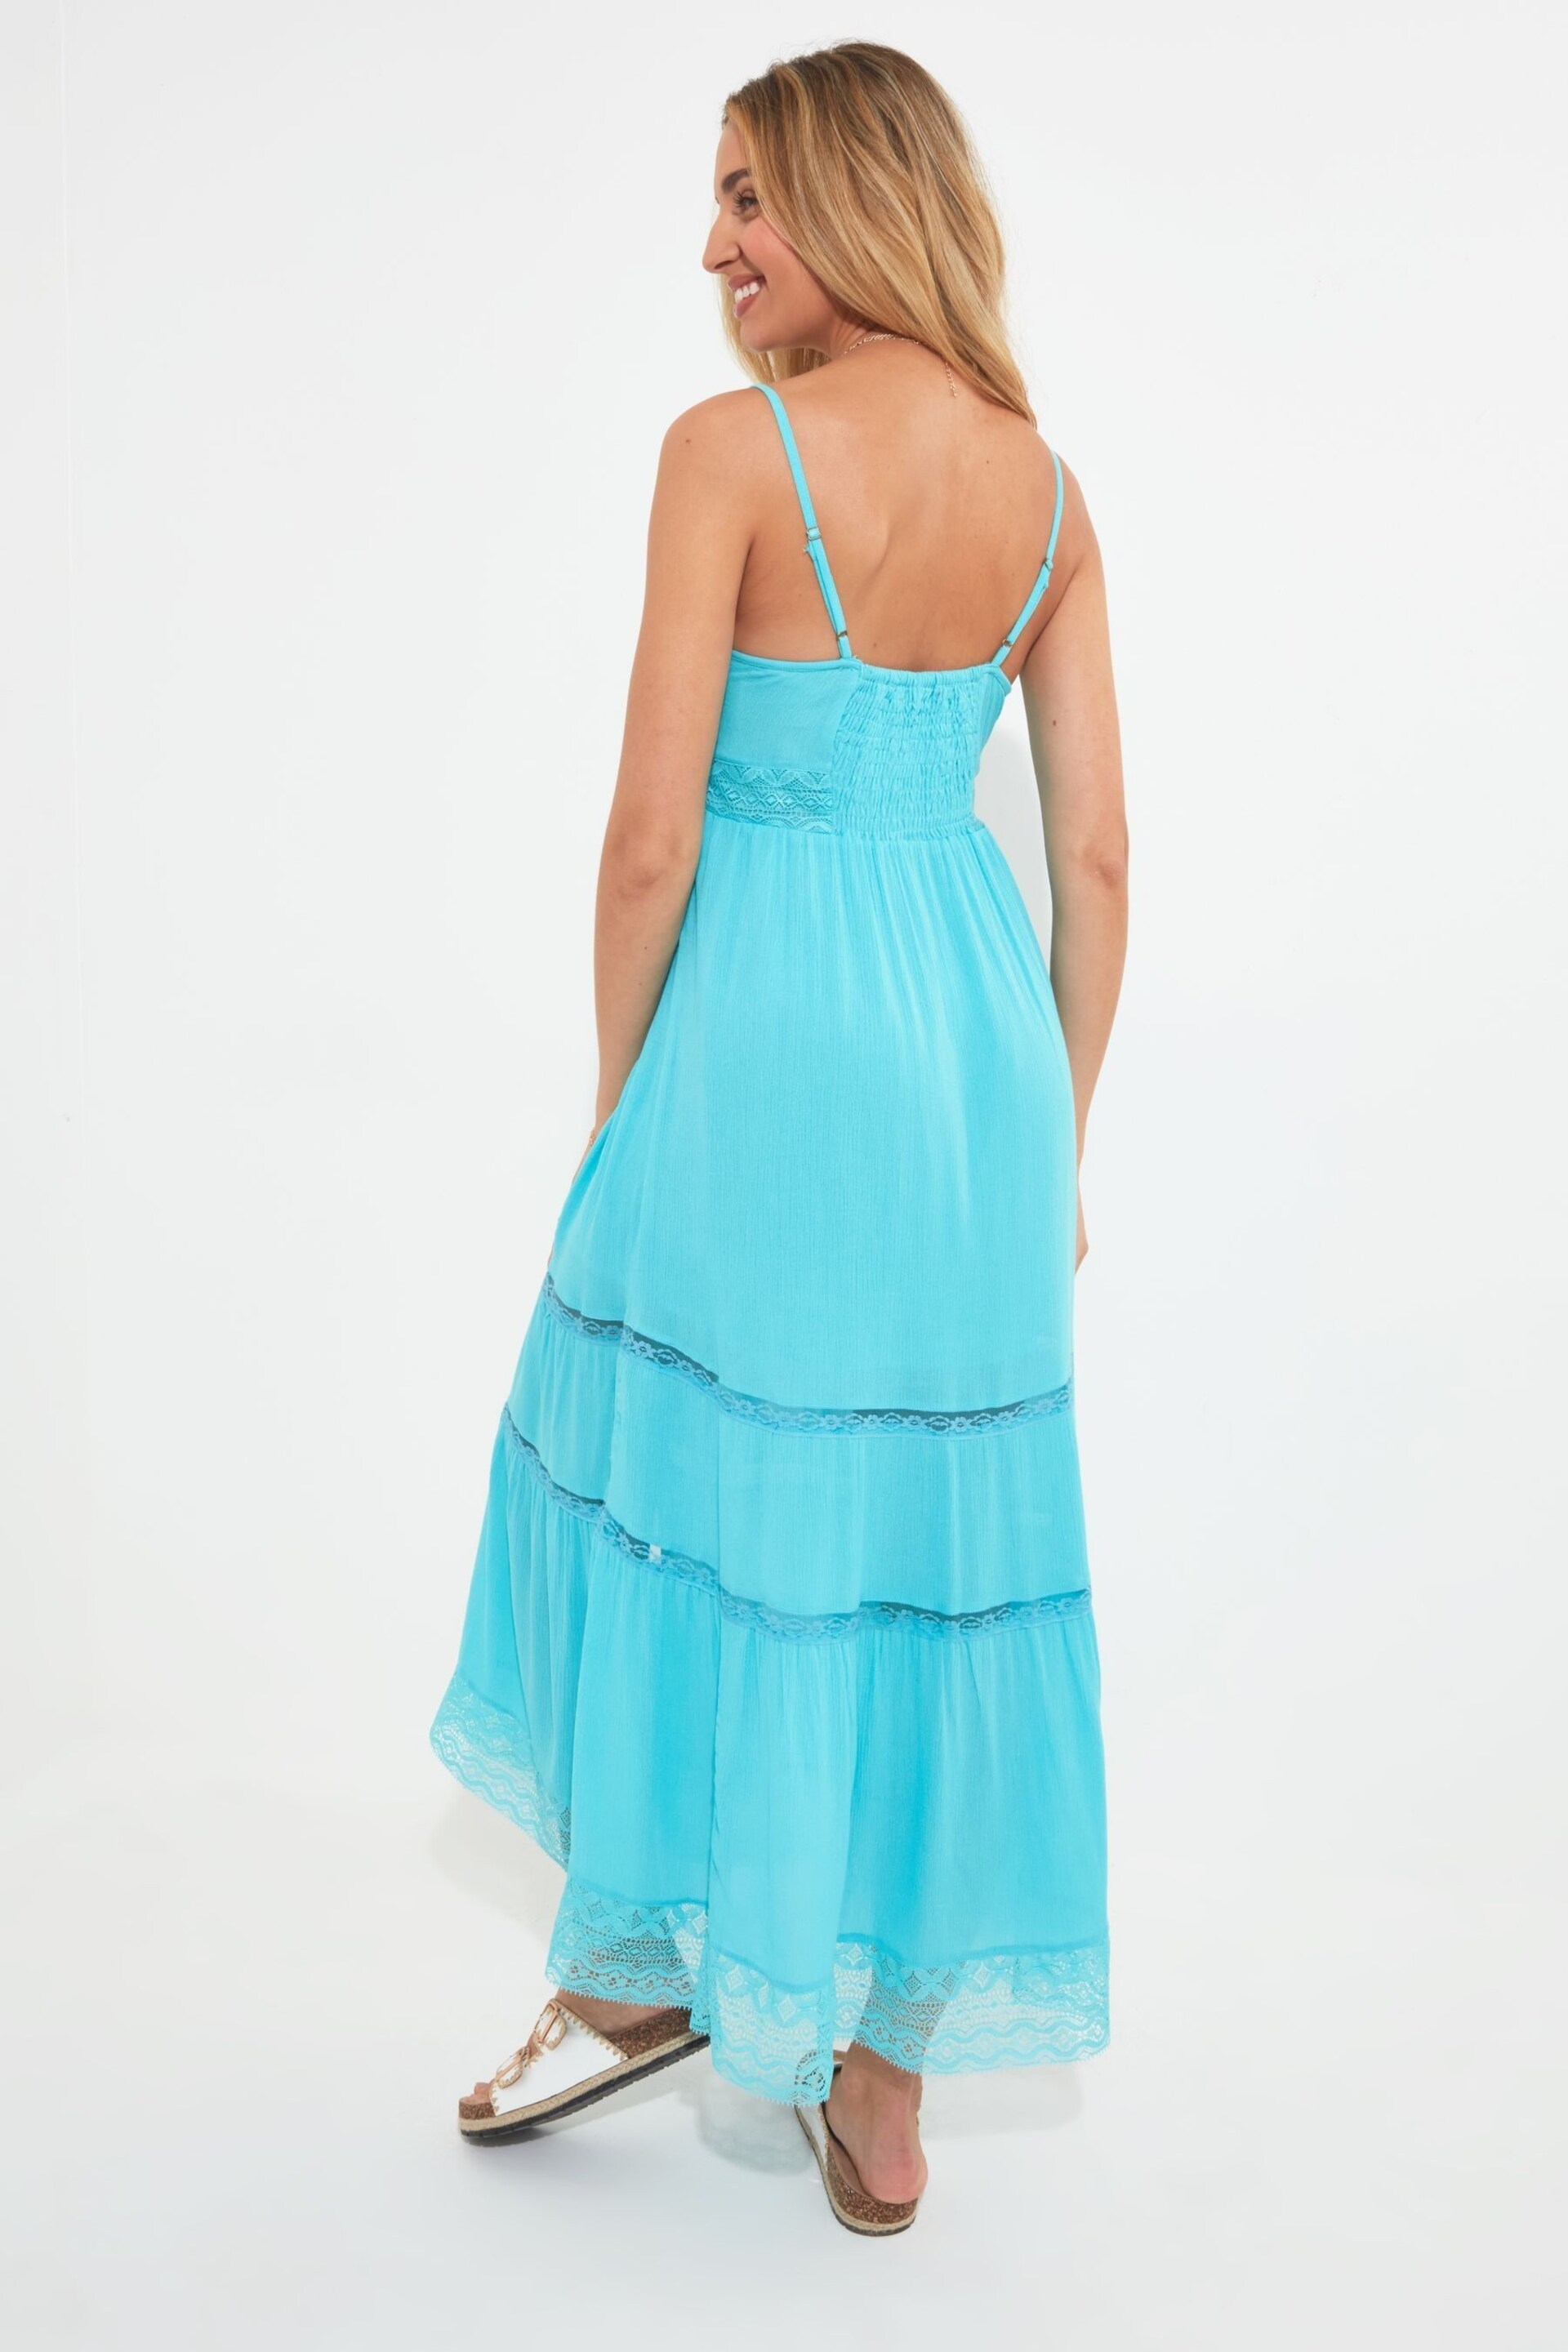 Joe Browns Blue Vibrant Tiered Strappy Button Through Maxi Sundress - Image 3 of 7